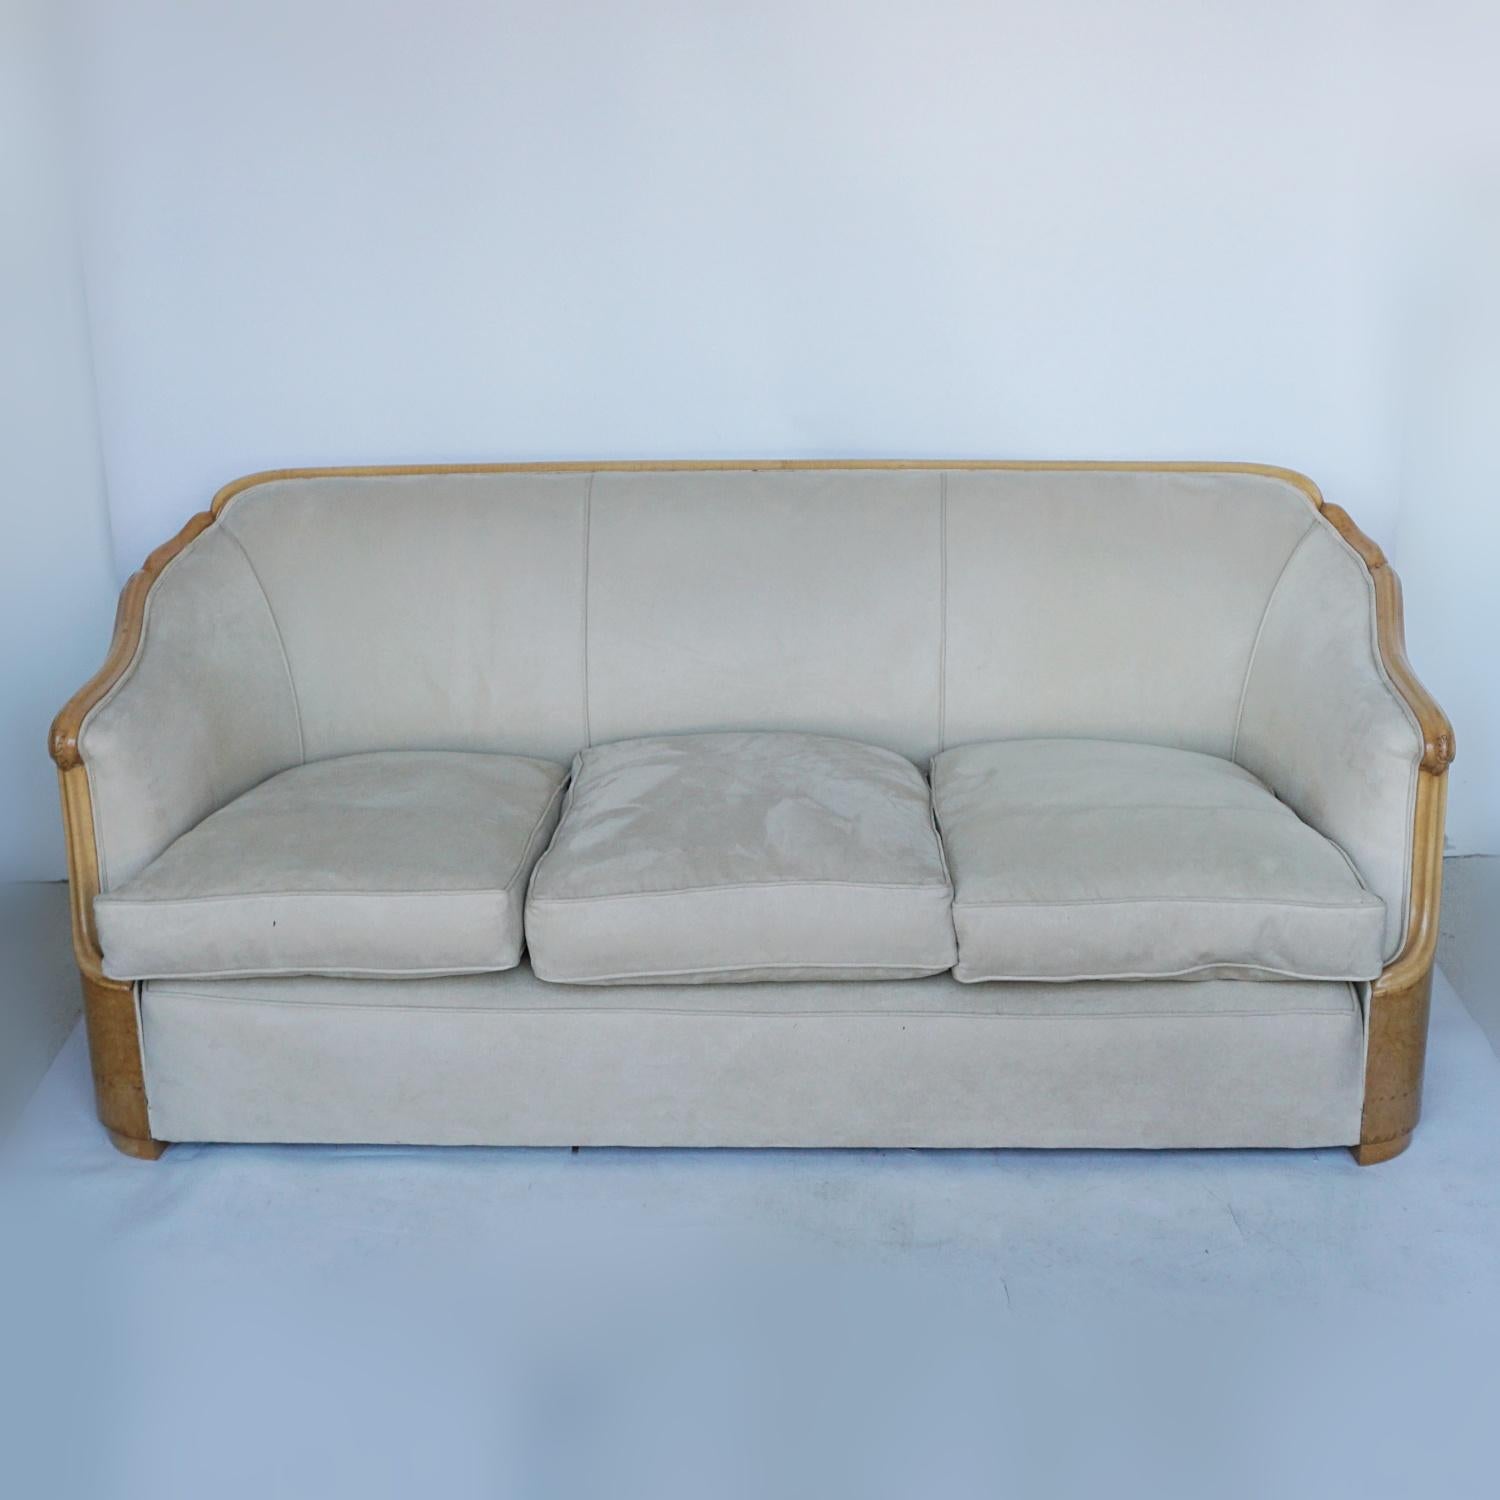 An Art Deco three seat sofa by Maurice Adams. Burr walnut wrap around veneers with satinwood banding and hand carved detail. Re-upholstered in Alcantara suede. 

Dimensions: H 74cm W 180cm D 80cm 

Origin: English

Date: Circa 1930

Item